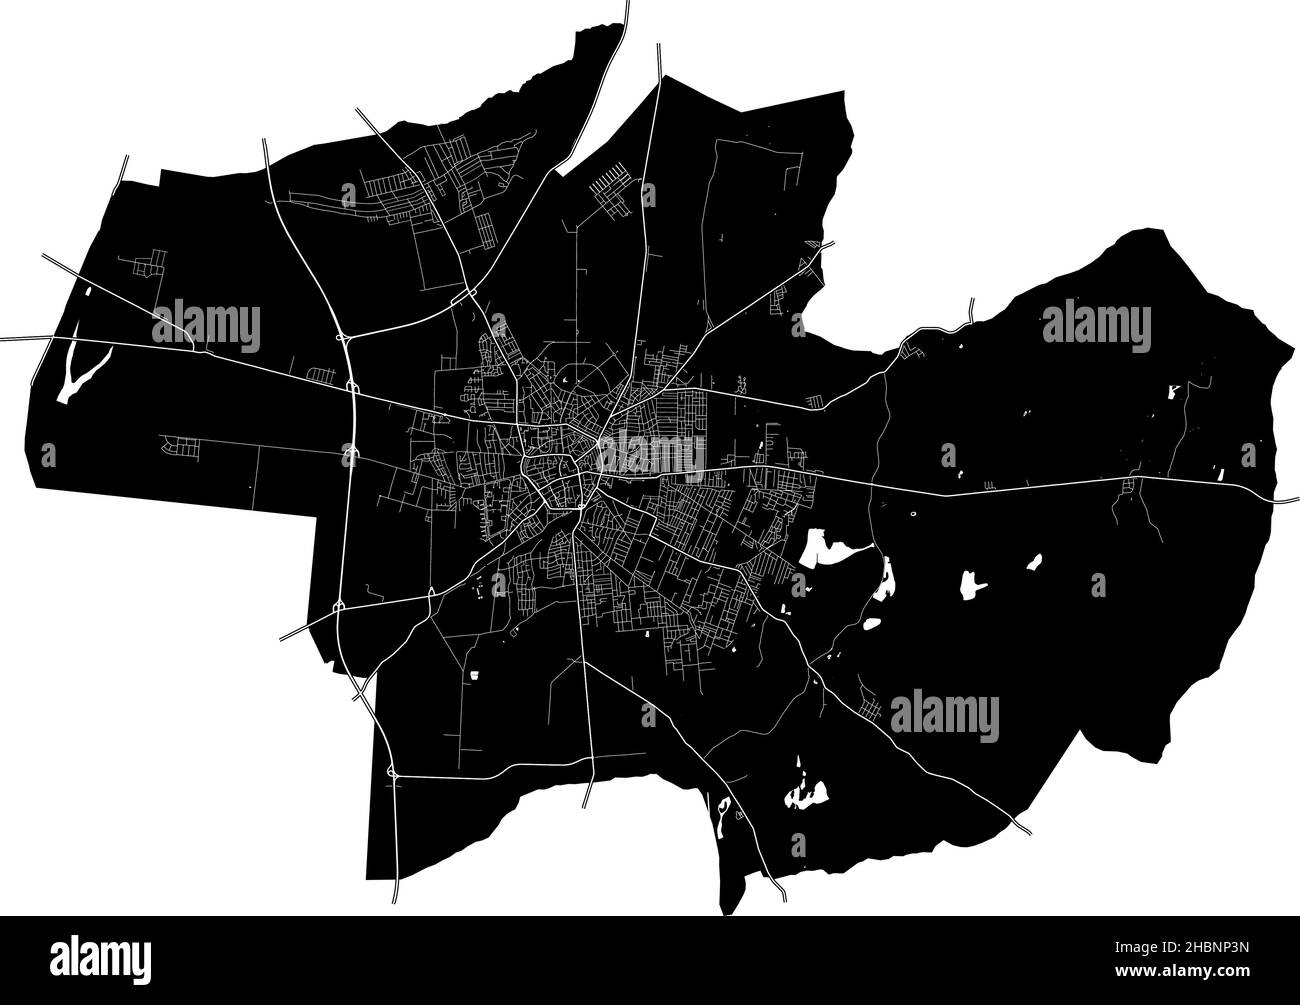 Debrecen, Hungary, high resolution vector map with city boundaries, and editable paths. The city map was drawn with white areas and lines for main roa Stock Vector